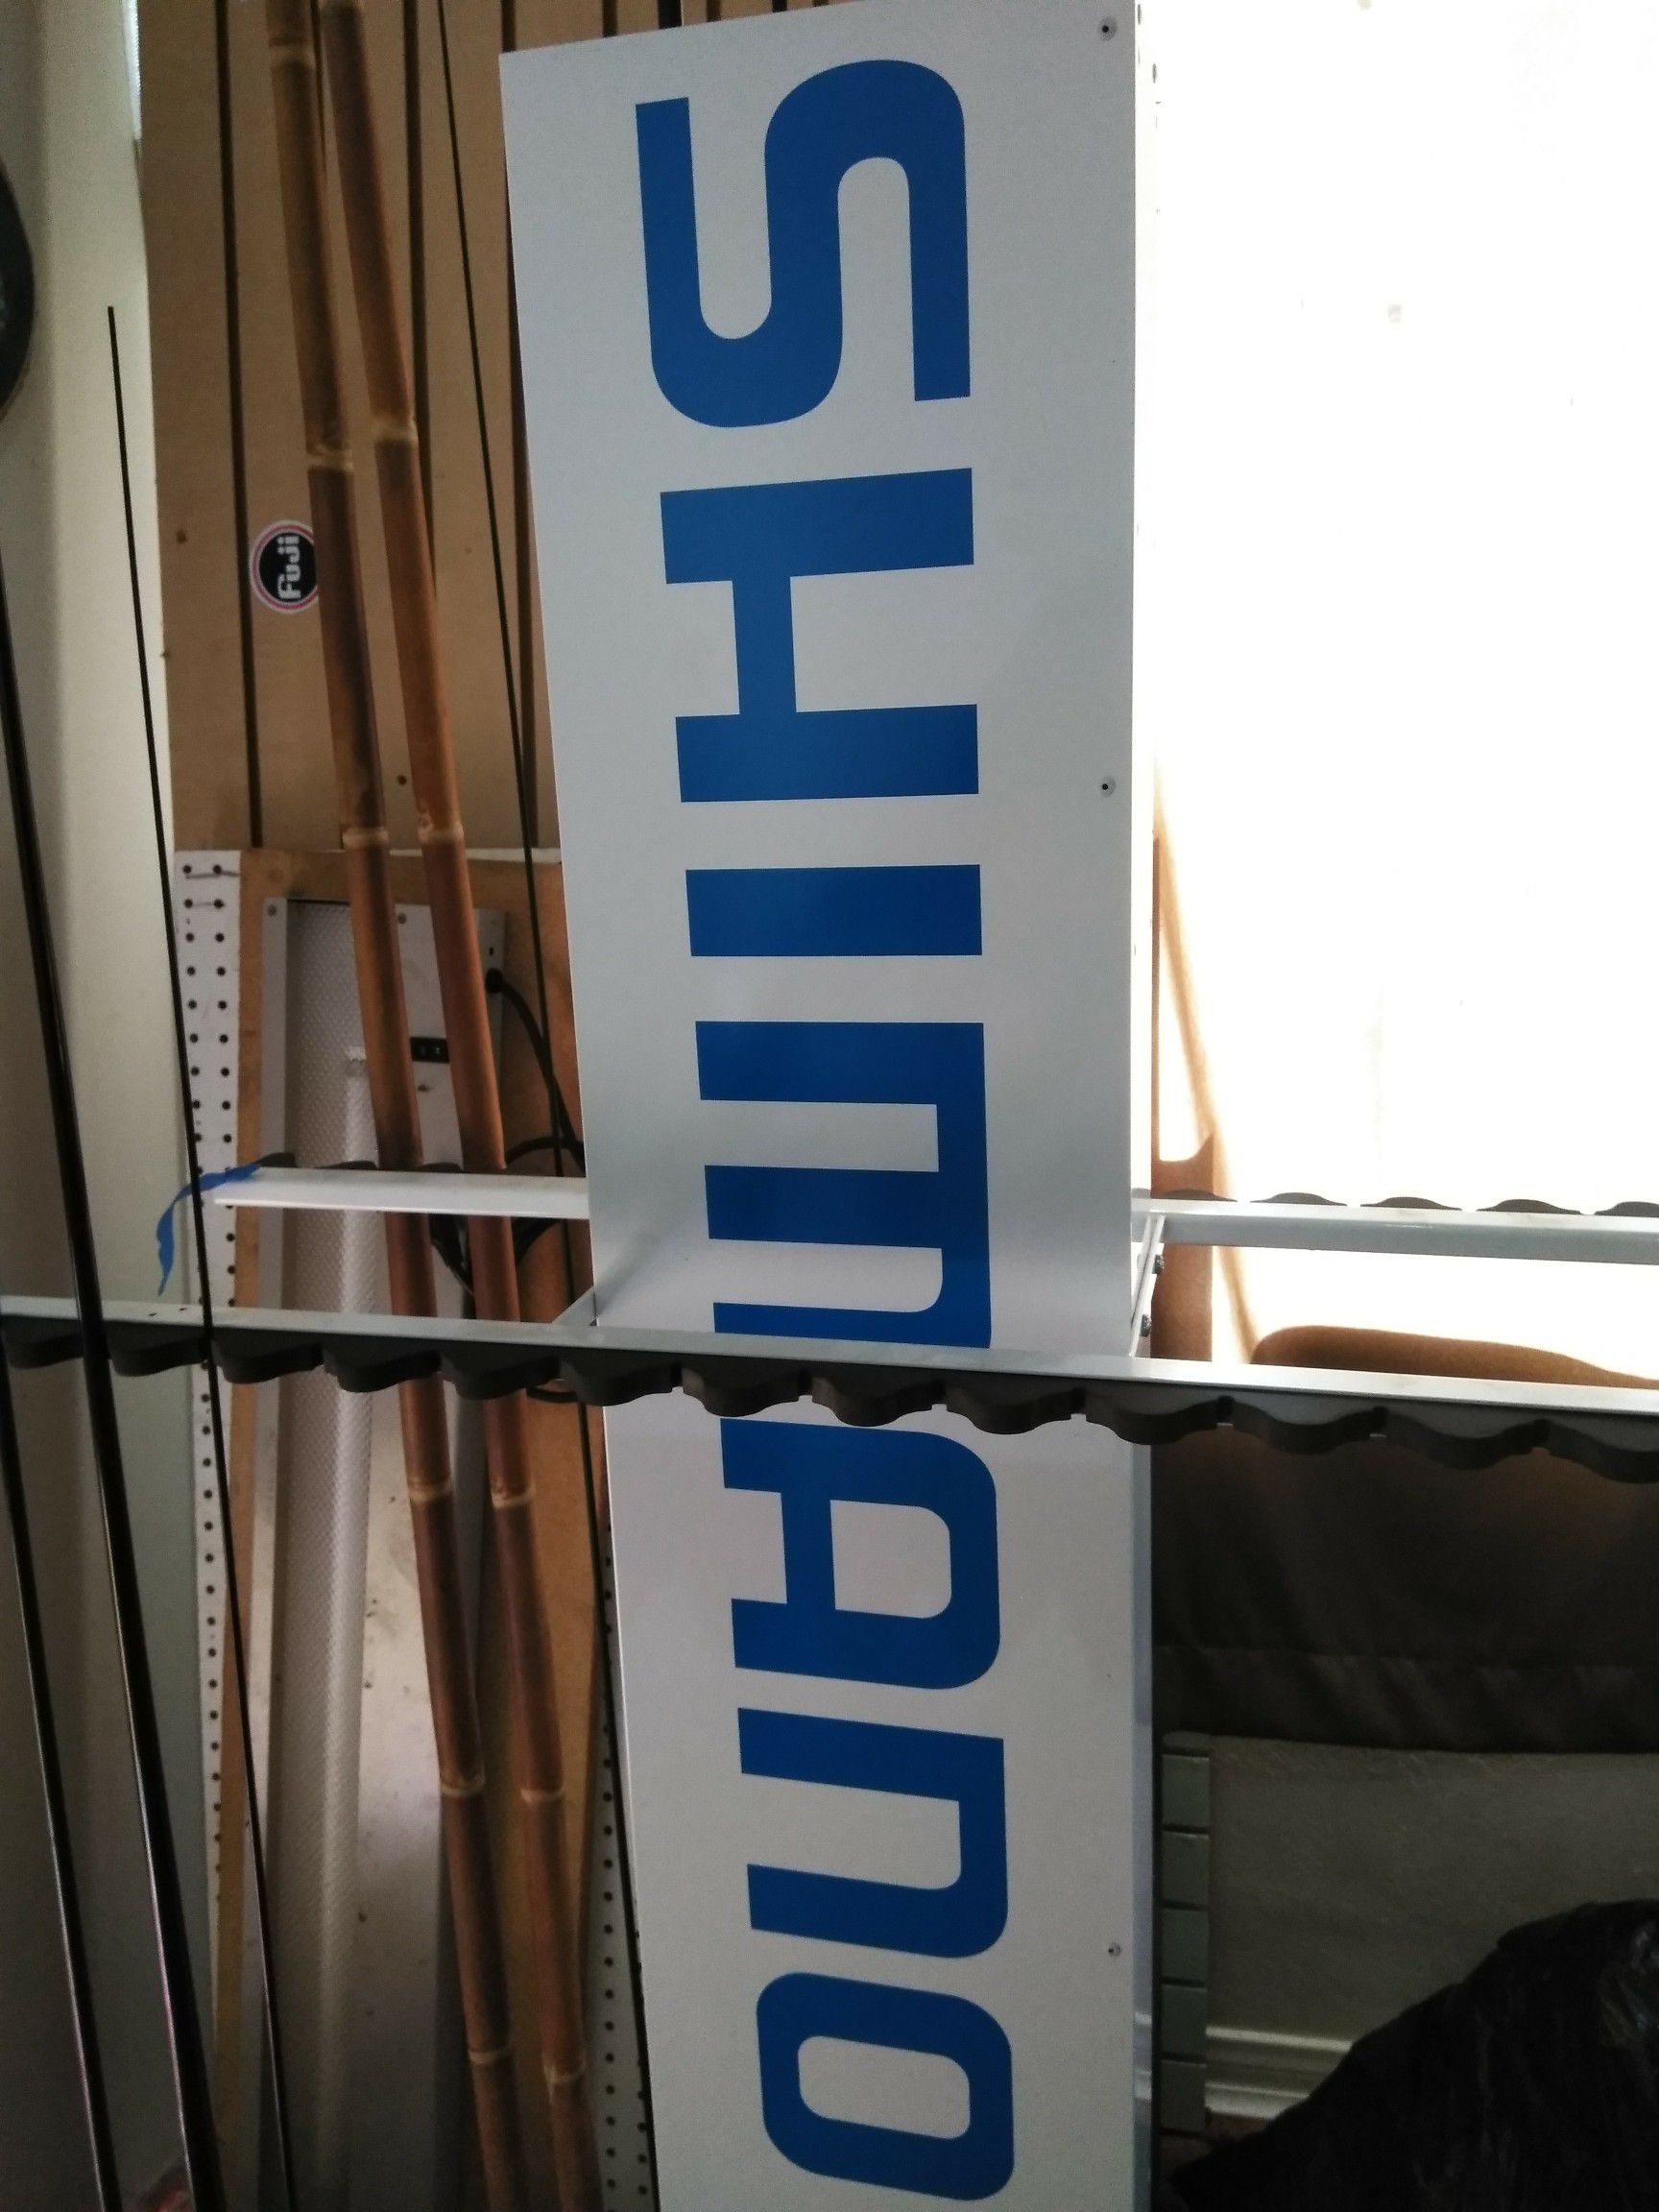 Shimano fishing rod rack for Sale in South Gate, CA - OfferUp